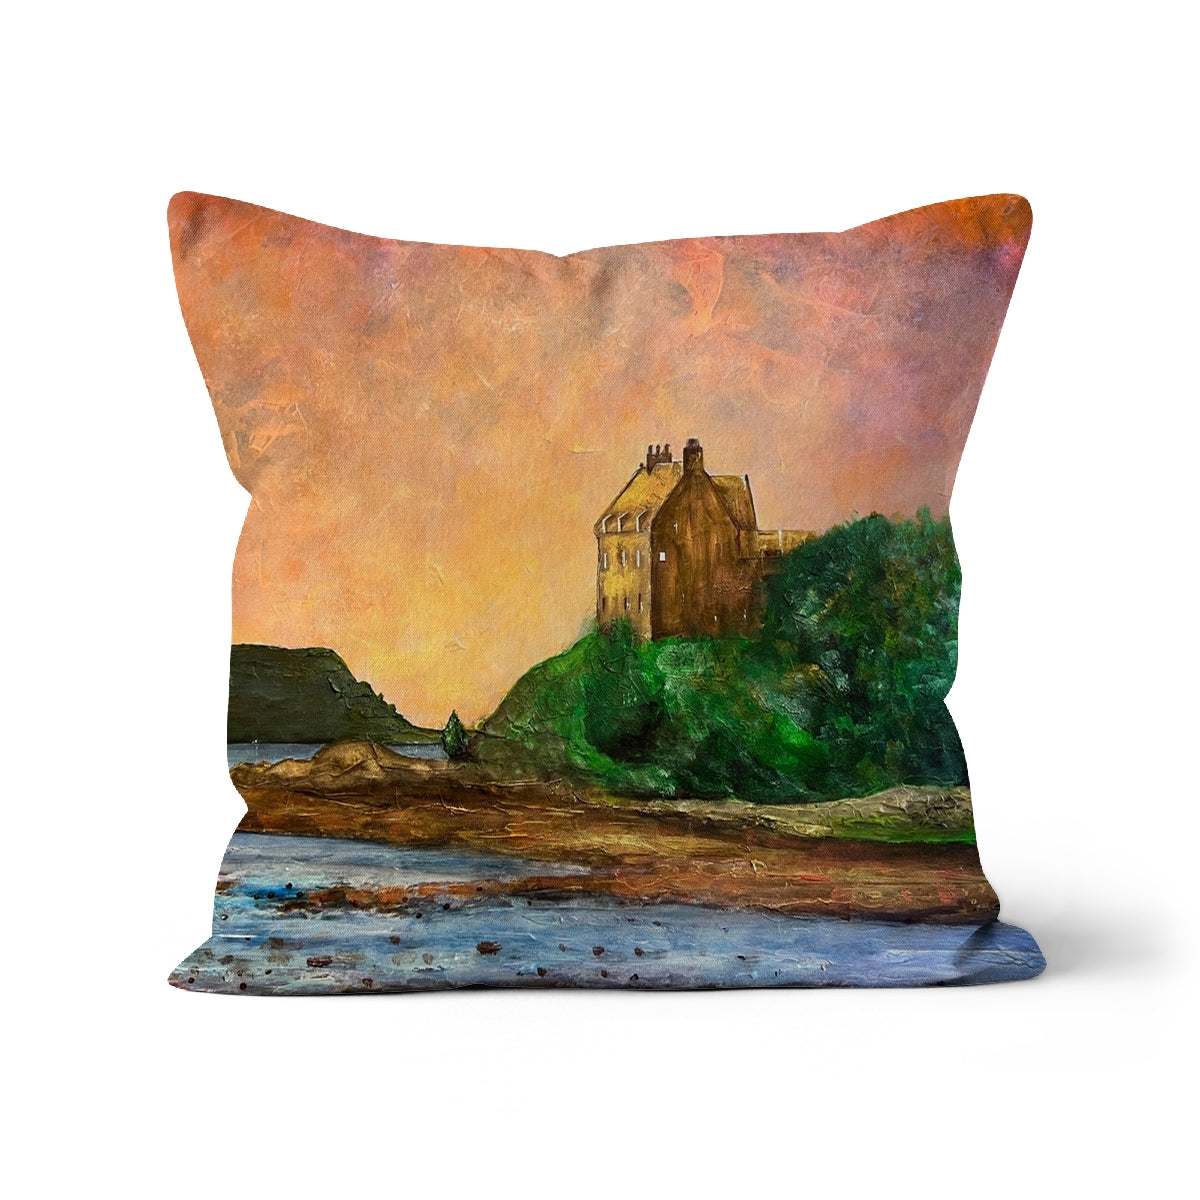 Duntrune Castle Art Gifts Cushion-Cushions-Historic & Iconic Scotland Art Gallery-Linen-24"x24"-Paintings, Prints, Homeware, Art Gifts From Scotland By Scottish Artist Kevin Hunter